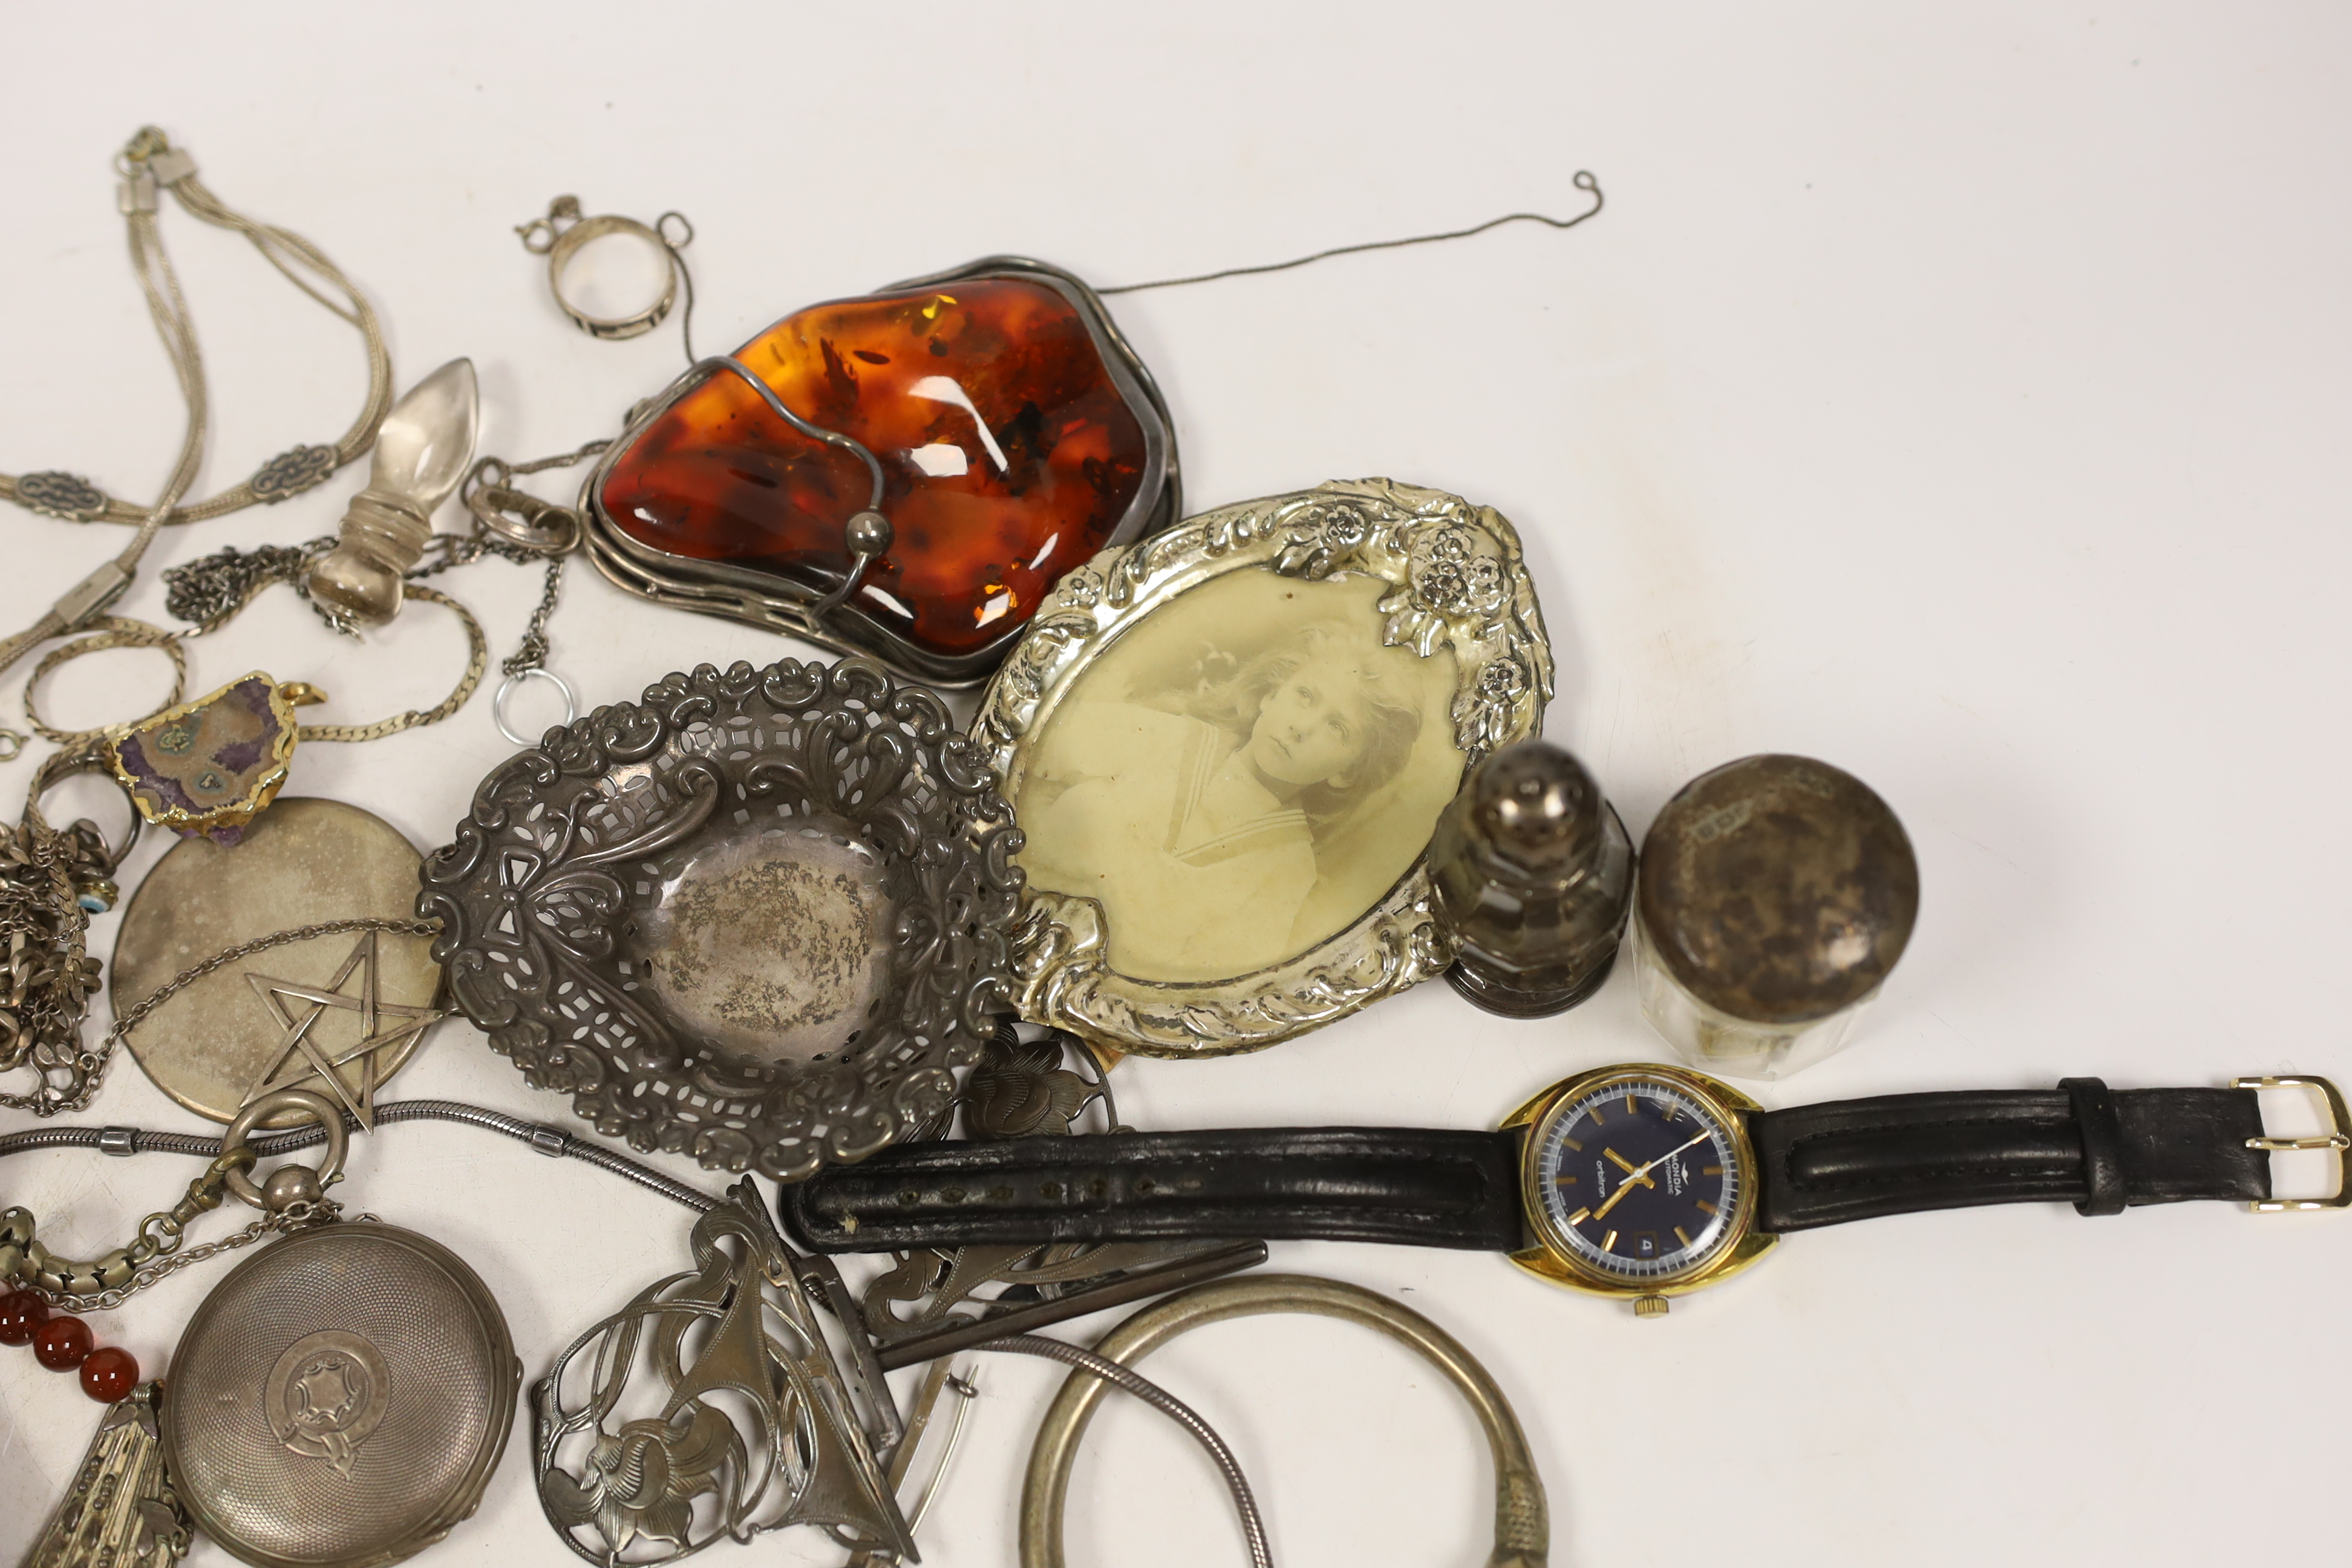 Miscellaneous silver including cigarette case, pepperette, bonbon dish, vesta case and belt buckle, a wrist watch and pocket watch and assorted jewellery including a large sterling mounted amber pendant and a Charles Hor